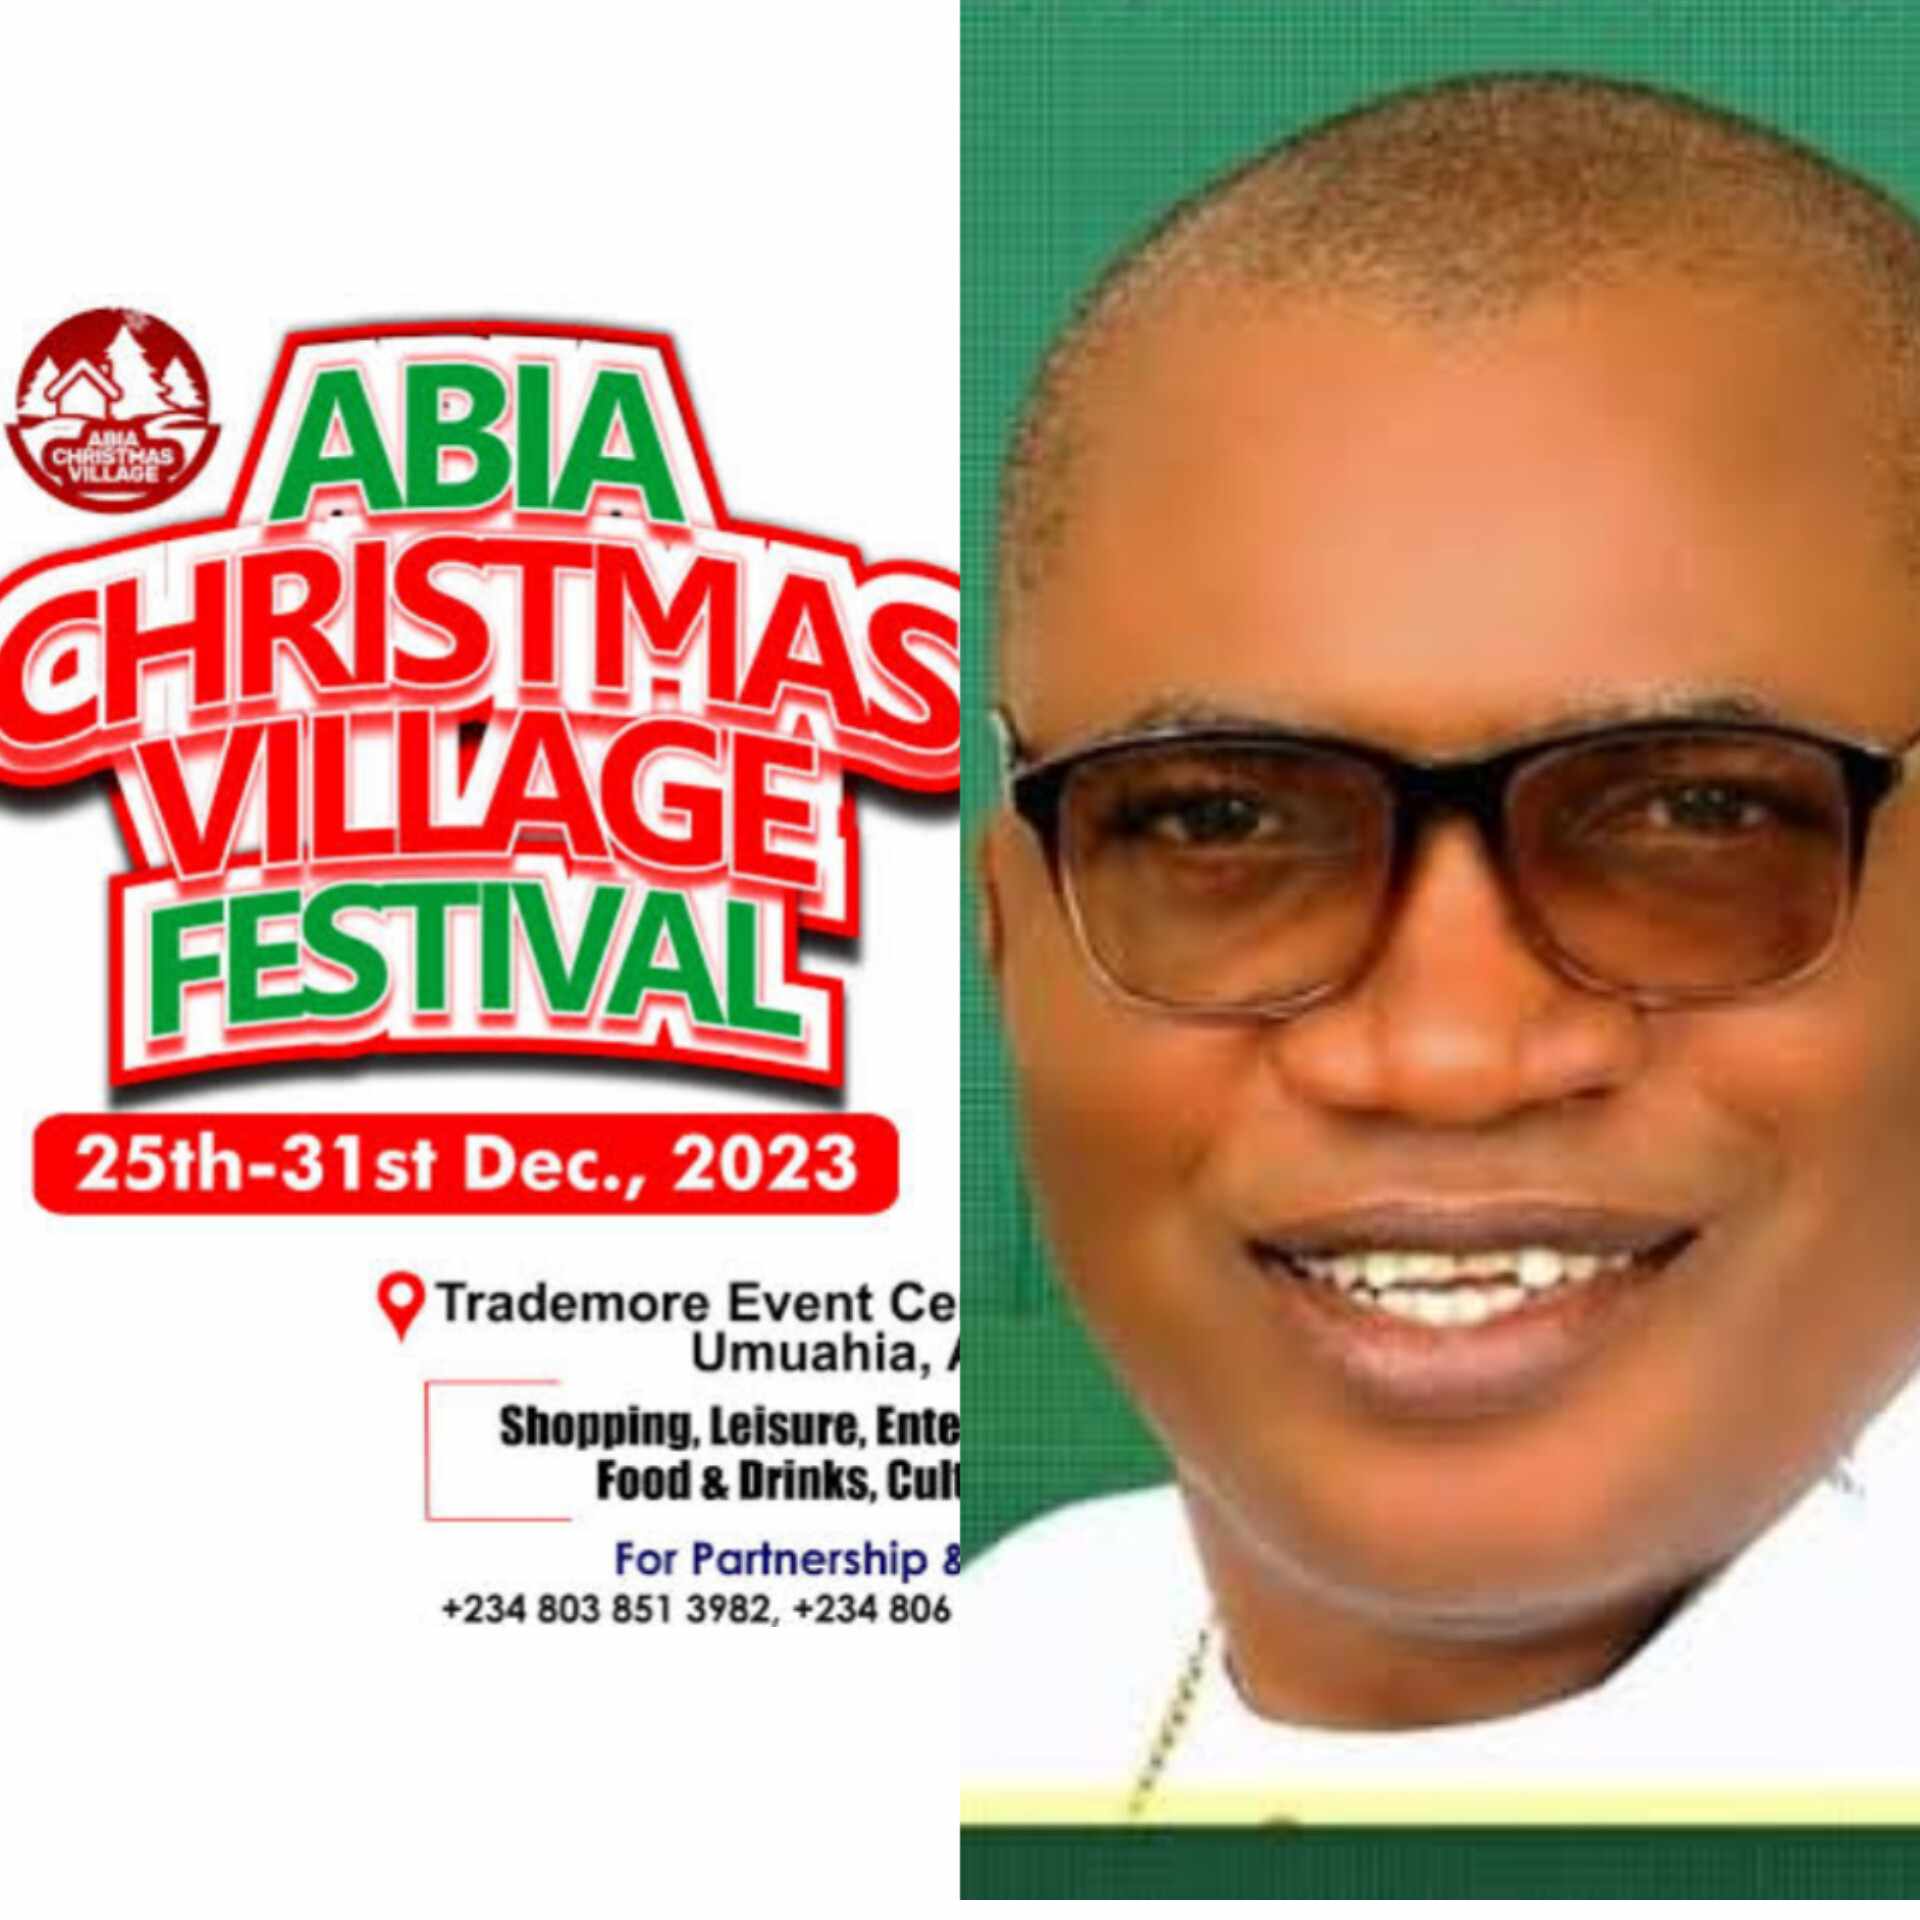 Bishop Nwankpa Endorses Abia Christmas Village Festival, Set To Host Day 5 Of The Event